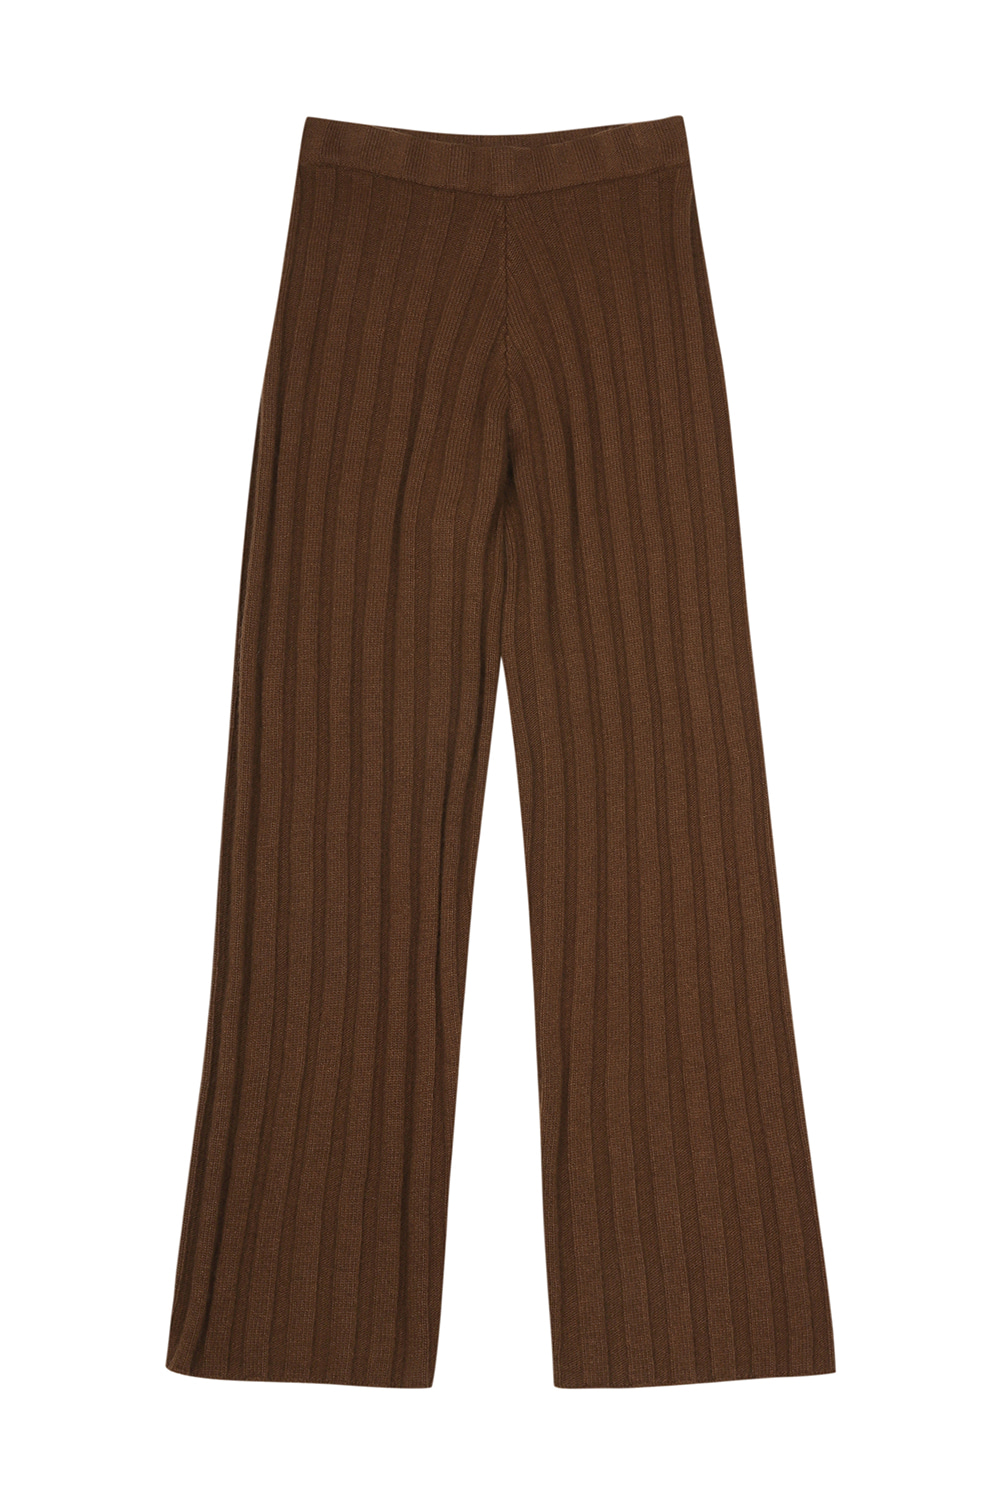 cashmere ribbed pants (brown)